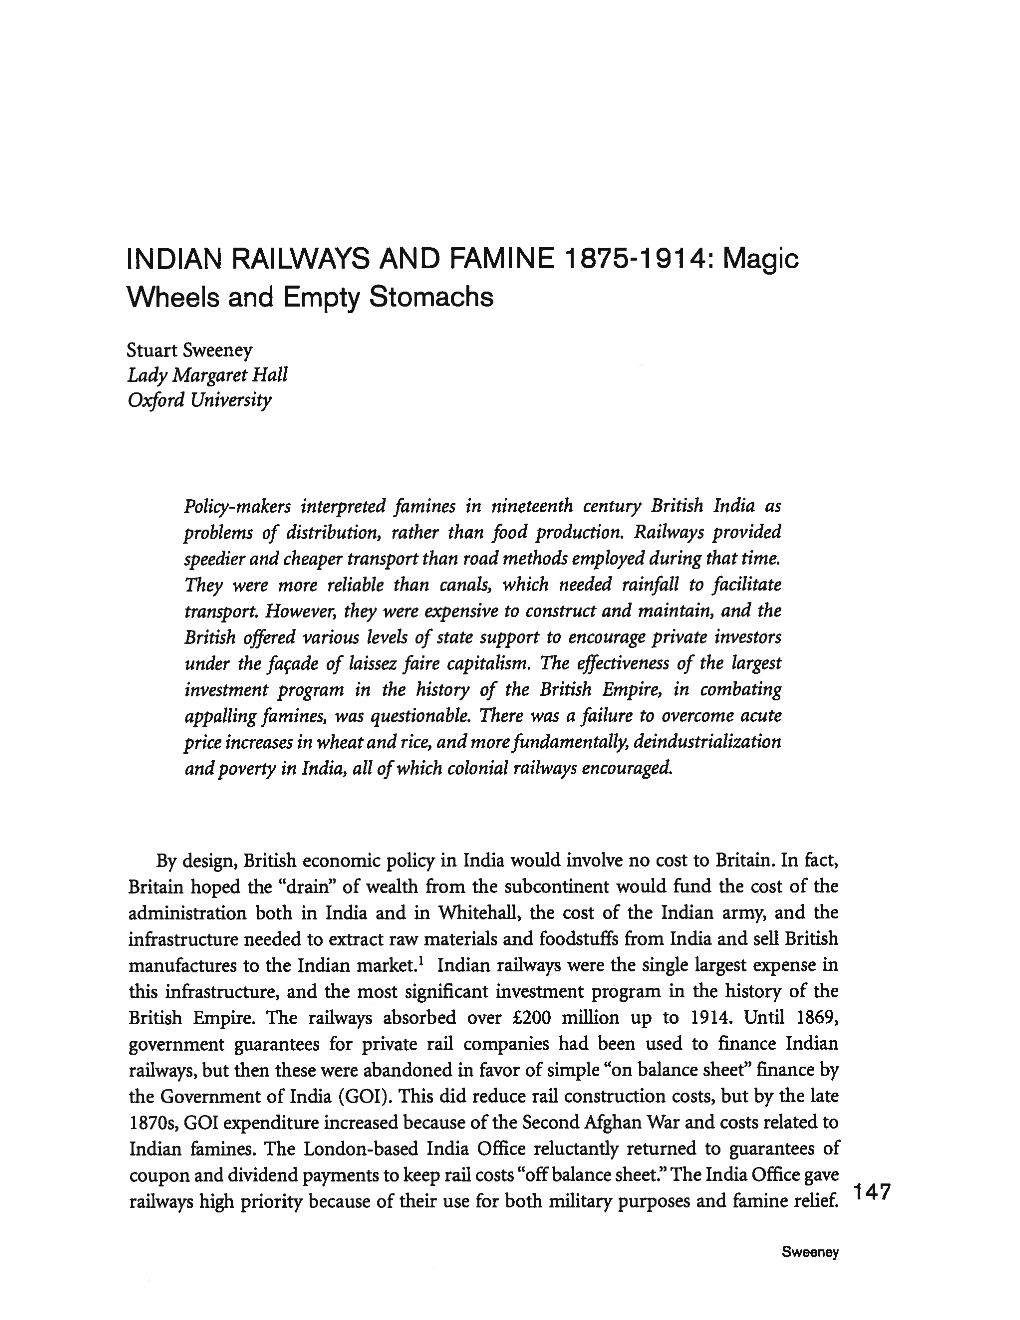 Indian Railways and Famine 1875-1914